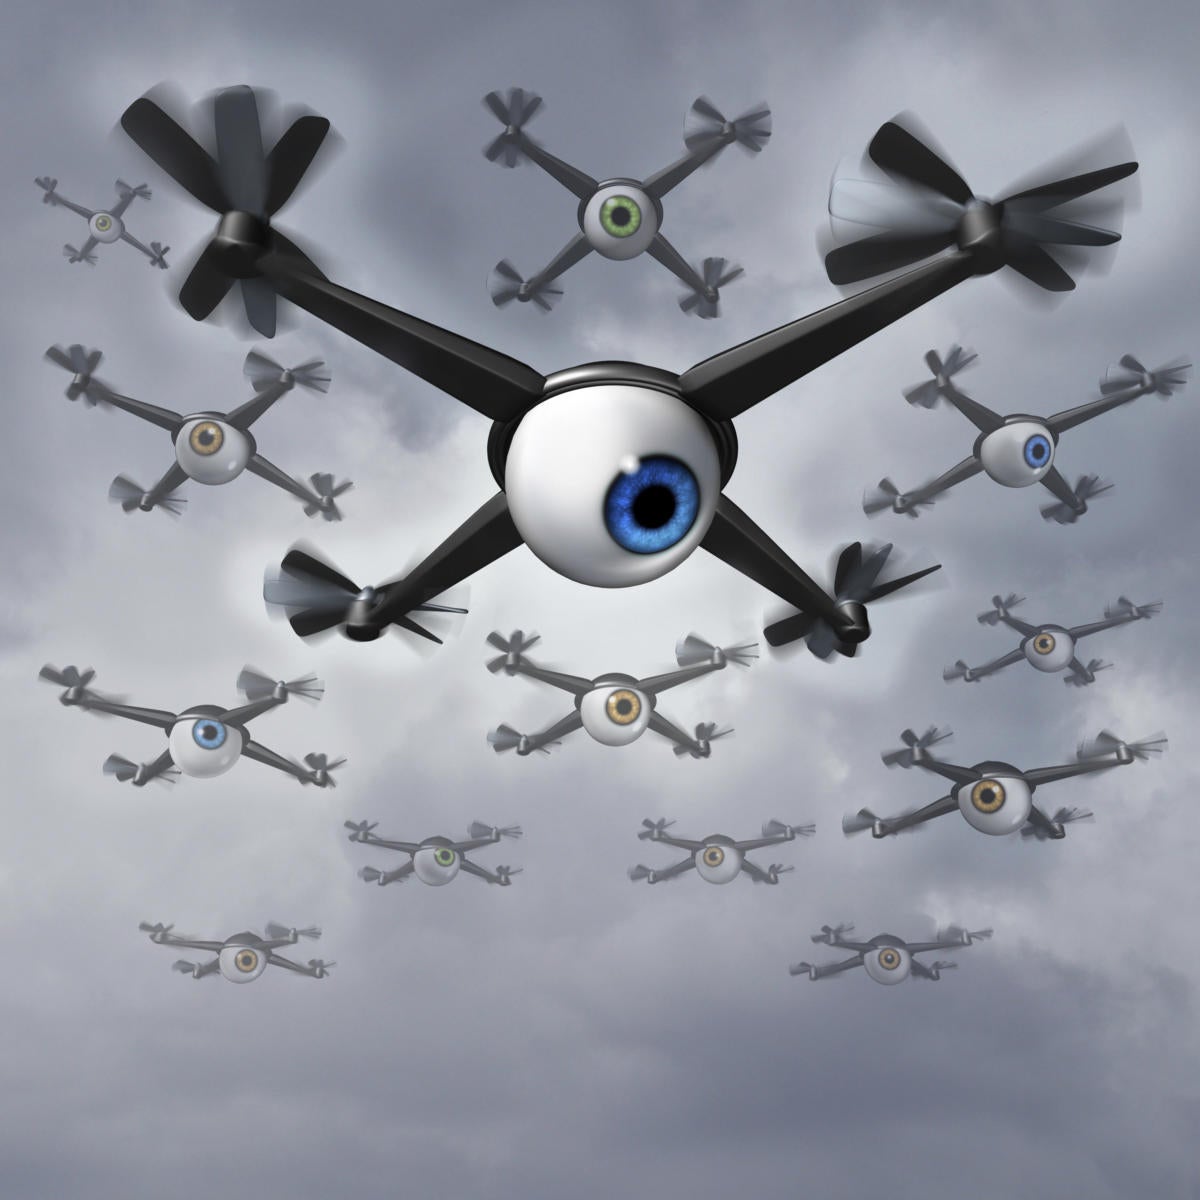 4 IT companies allowed to use commercial drones